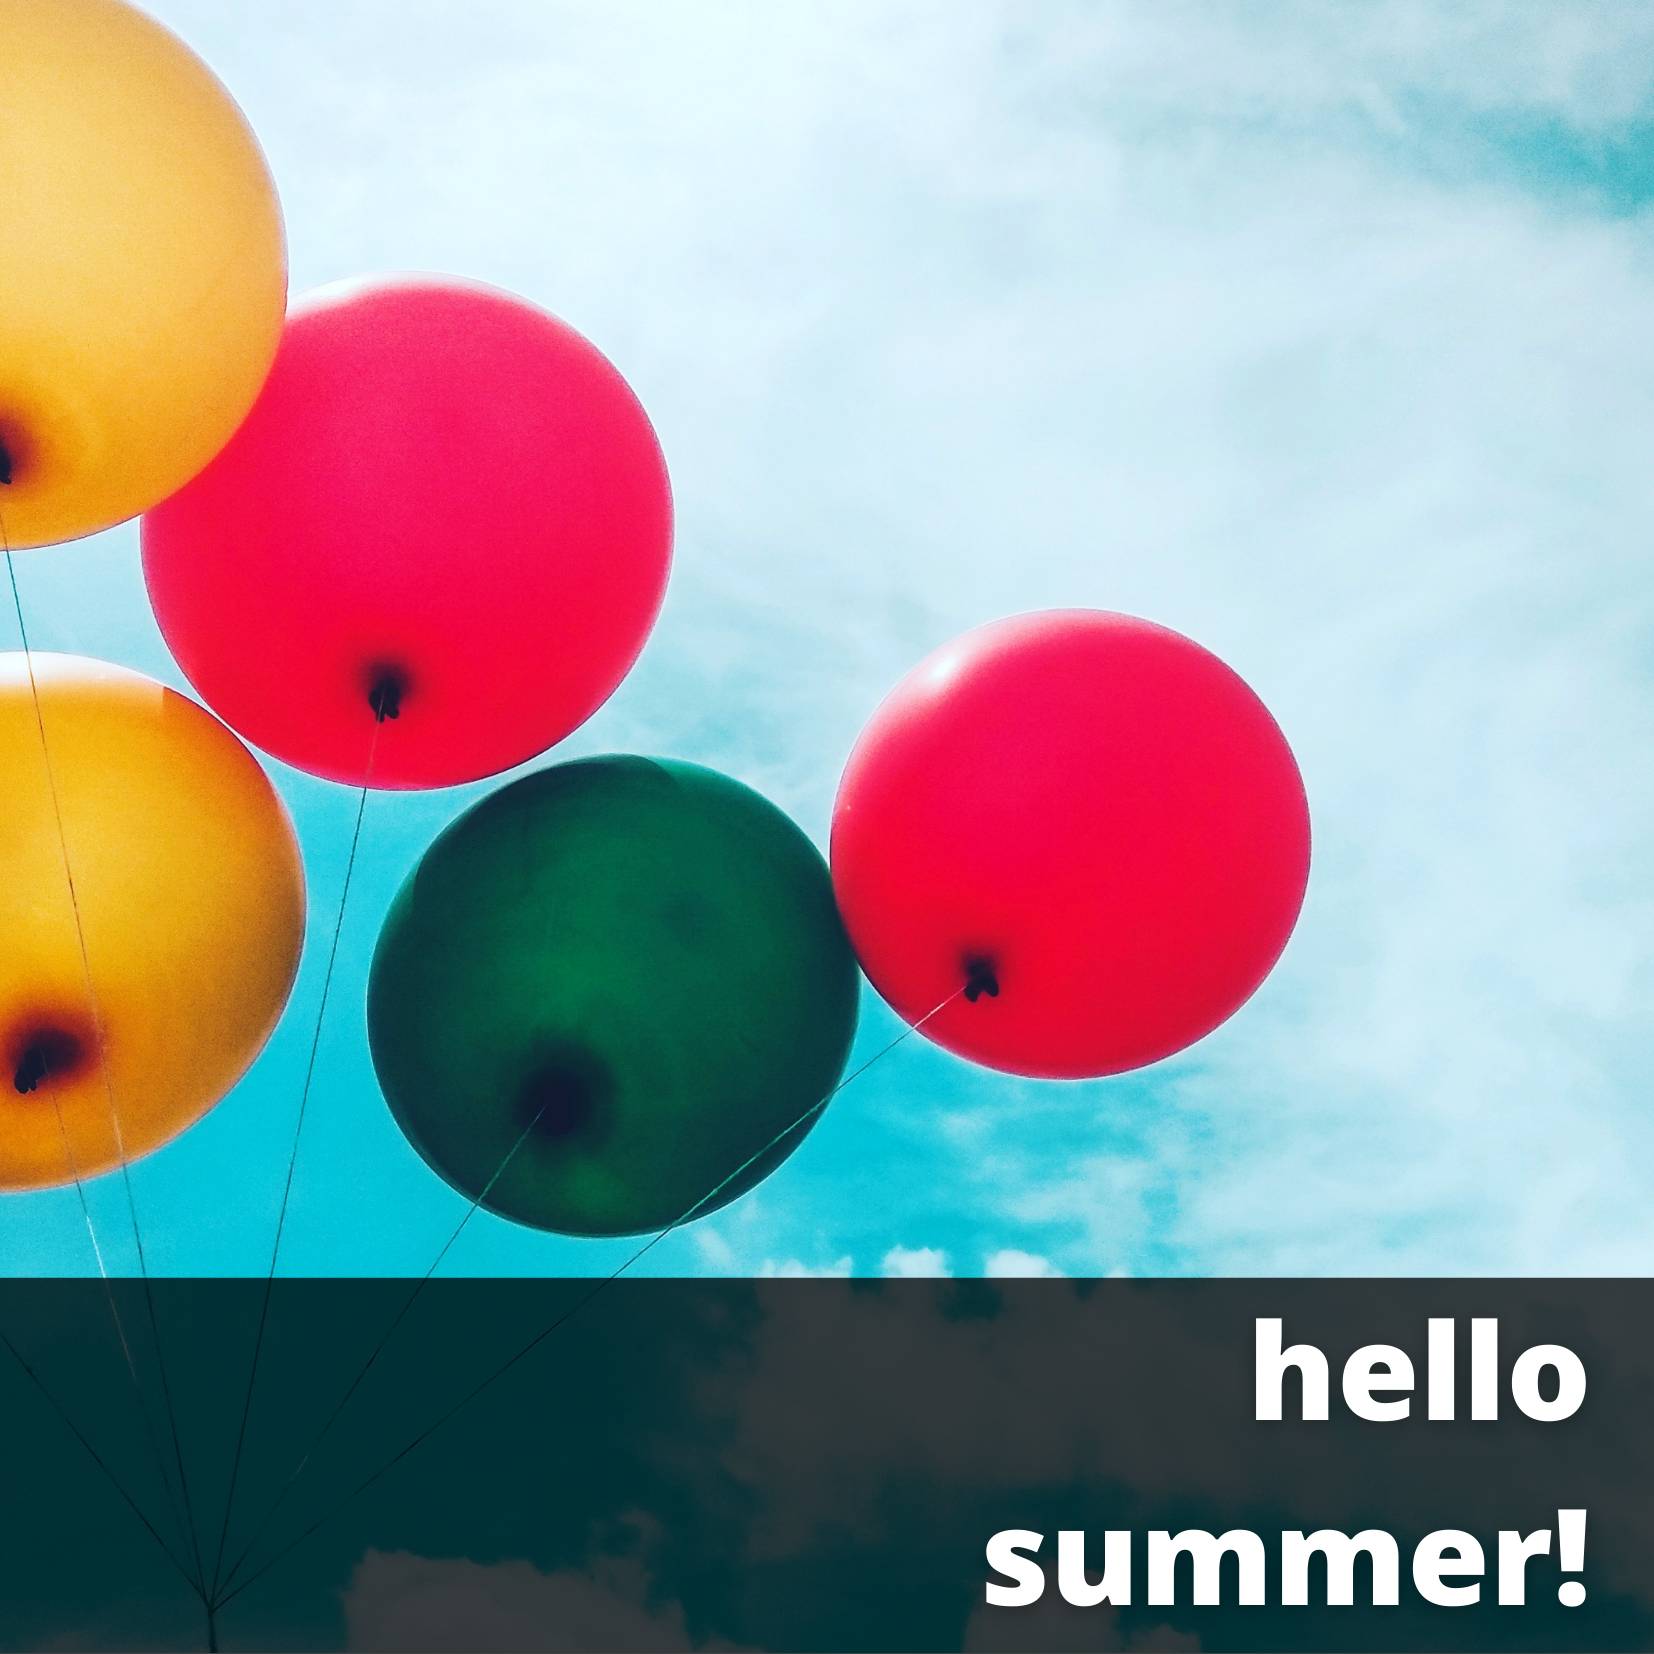 hello summer with balloons